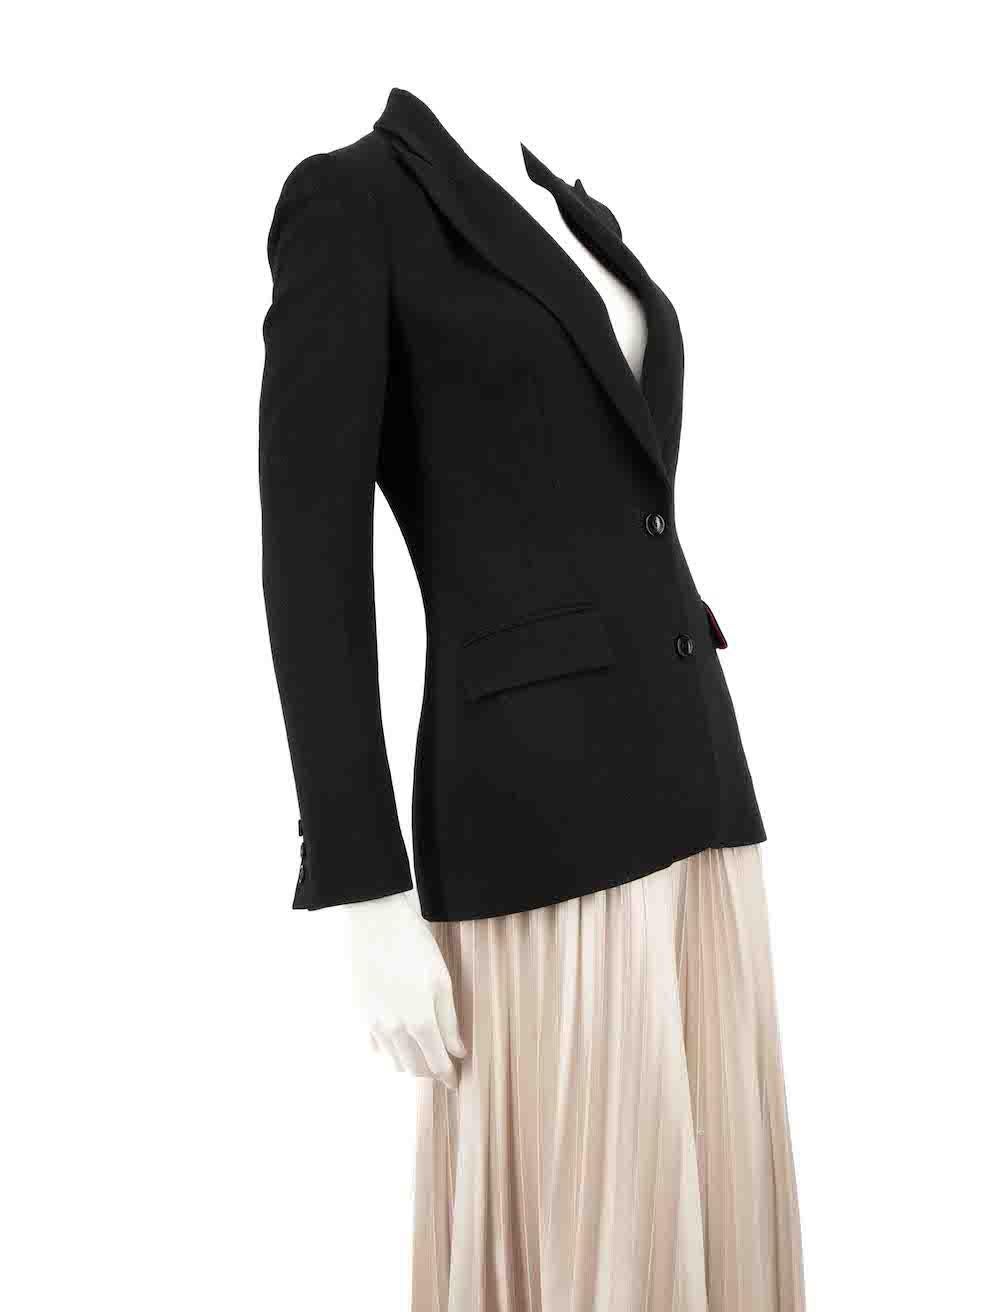 CONDITION is Very good. Minimal wear to blazer is evident. Minimal wear to the underarms at the lining with tears to the seams on this used D&G designer resale item.
 
 Details
 Black
 Wool
 Blazer
 Shoulder pads
 Button up fastening
 3x Front